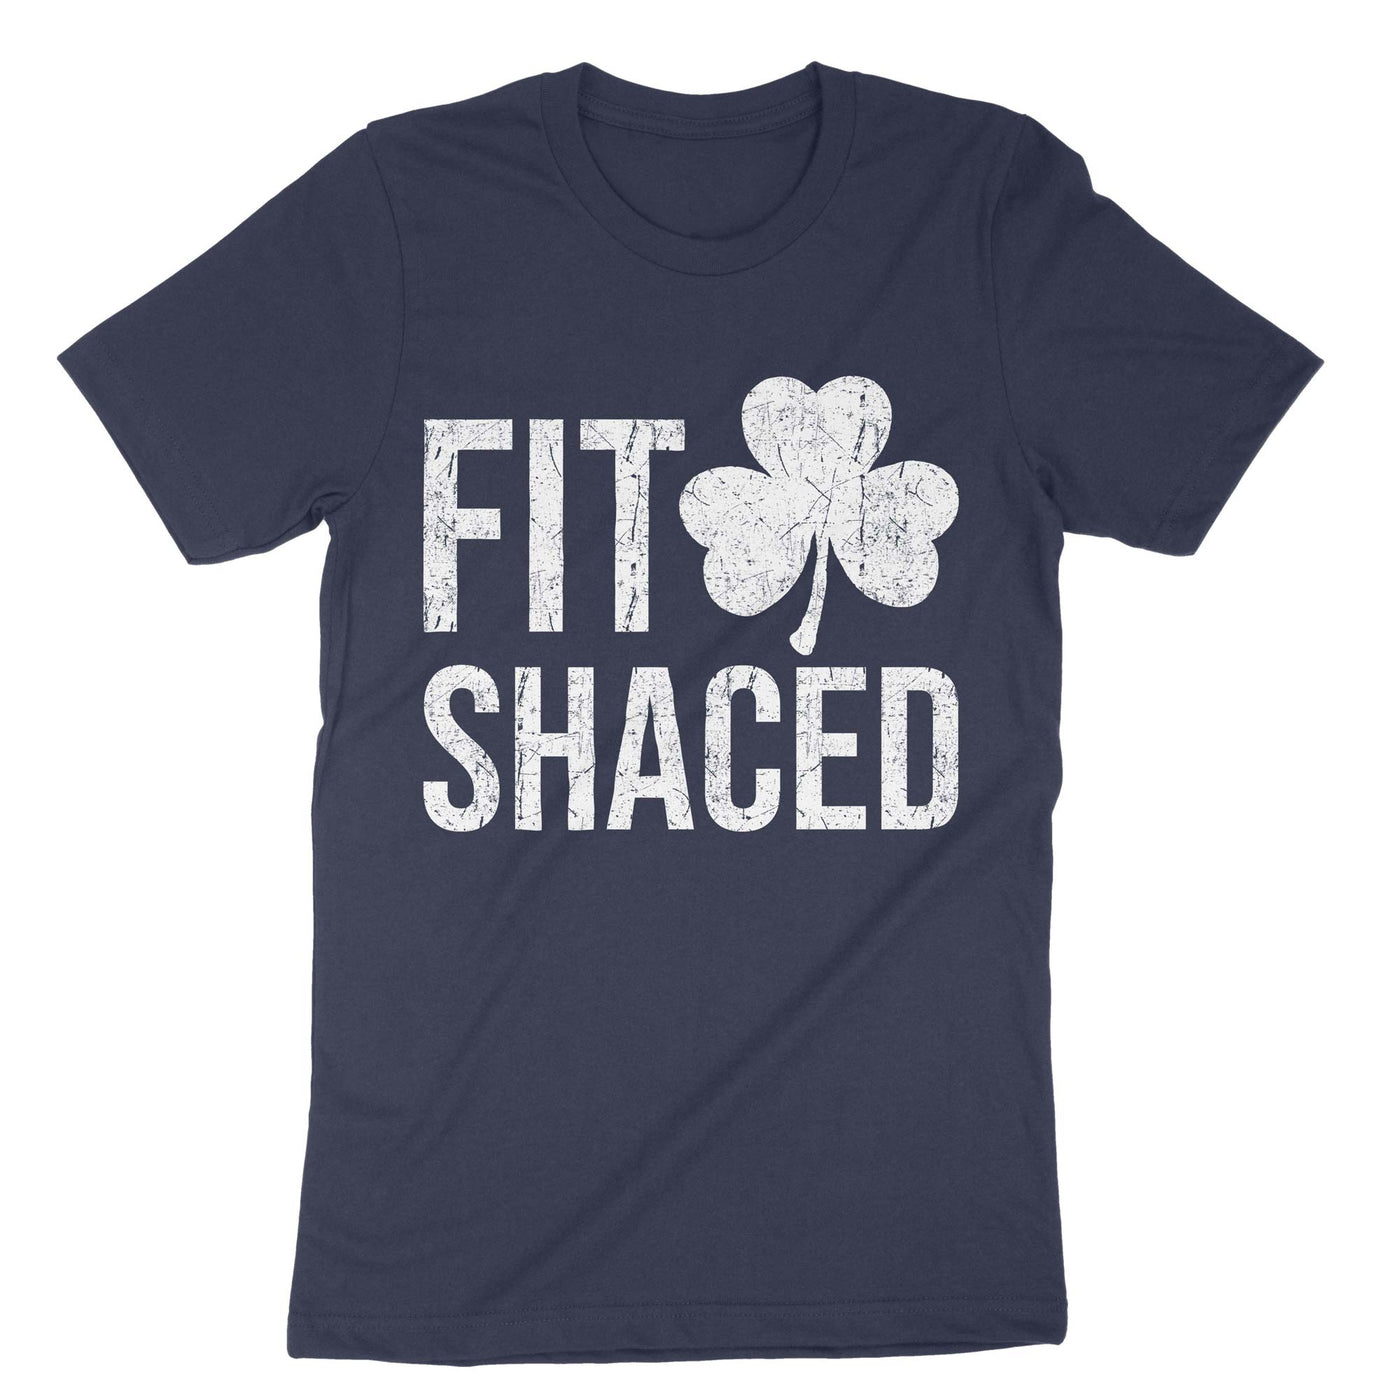 Navy Fit Shaced T-Shirt#color_navy